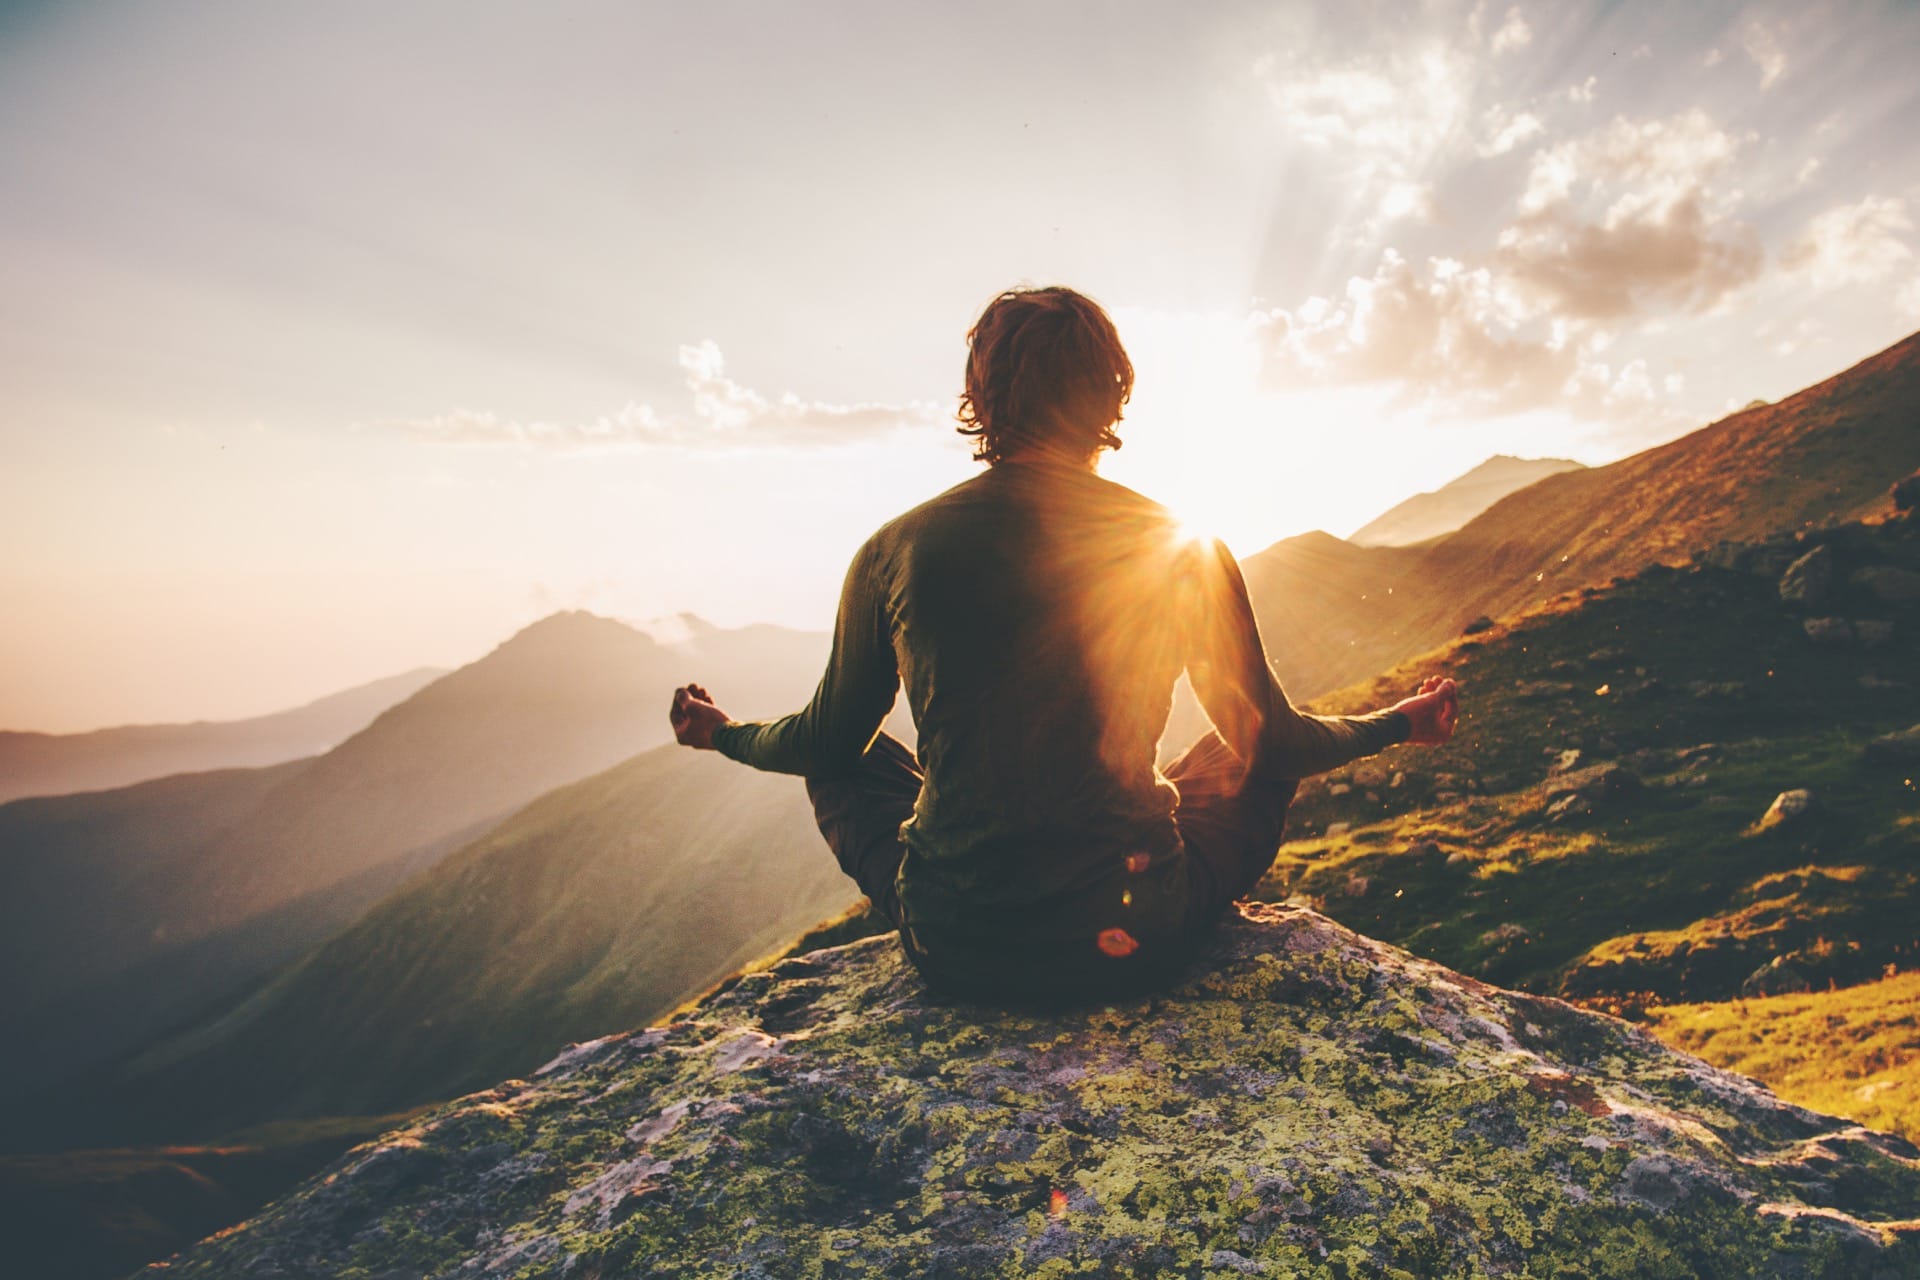 https://www.yourhealth.net.au/wp-content/uploads/2019/11/man-meditating-at-sunset-in-the-mountains.jpg